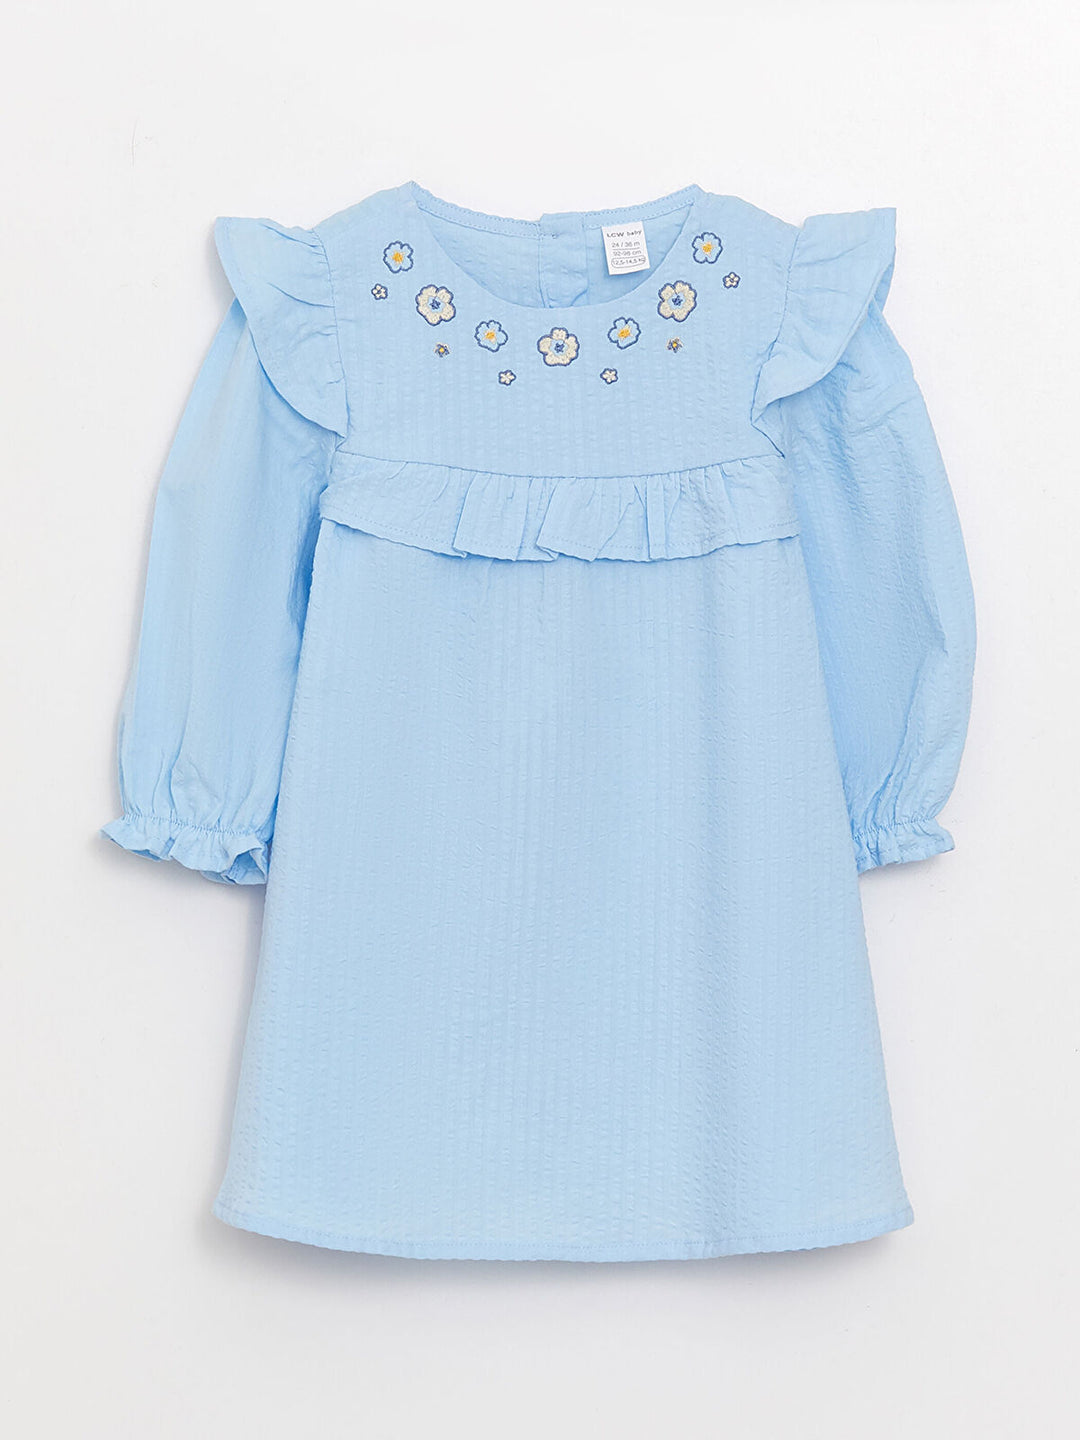 Crew Neck Long Sleeve Embroidery Detailed Baby Girl Dress